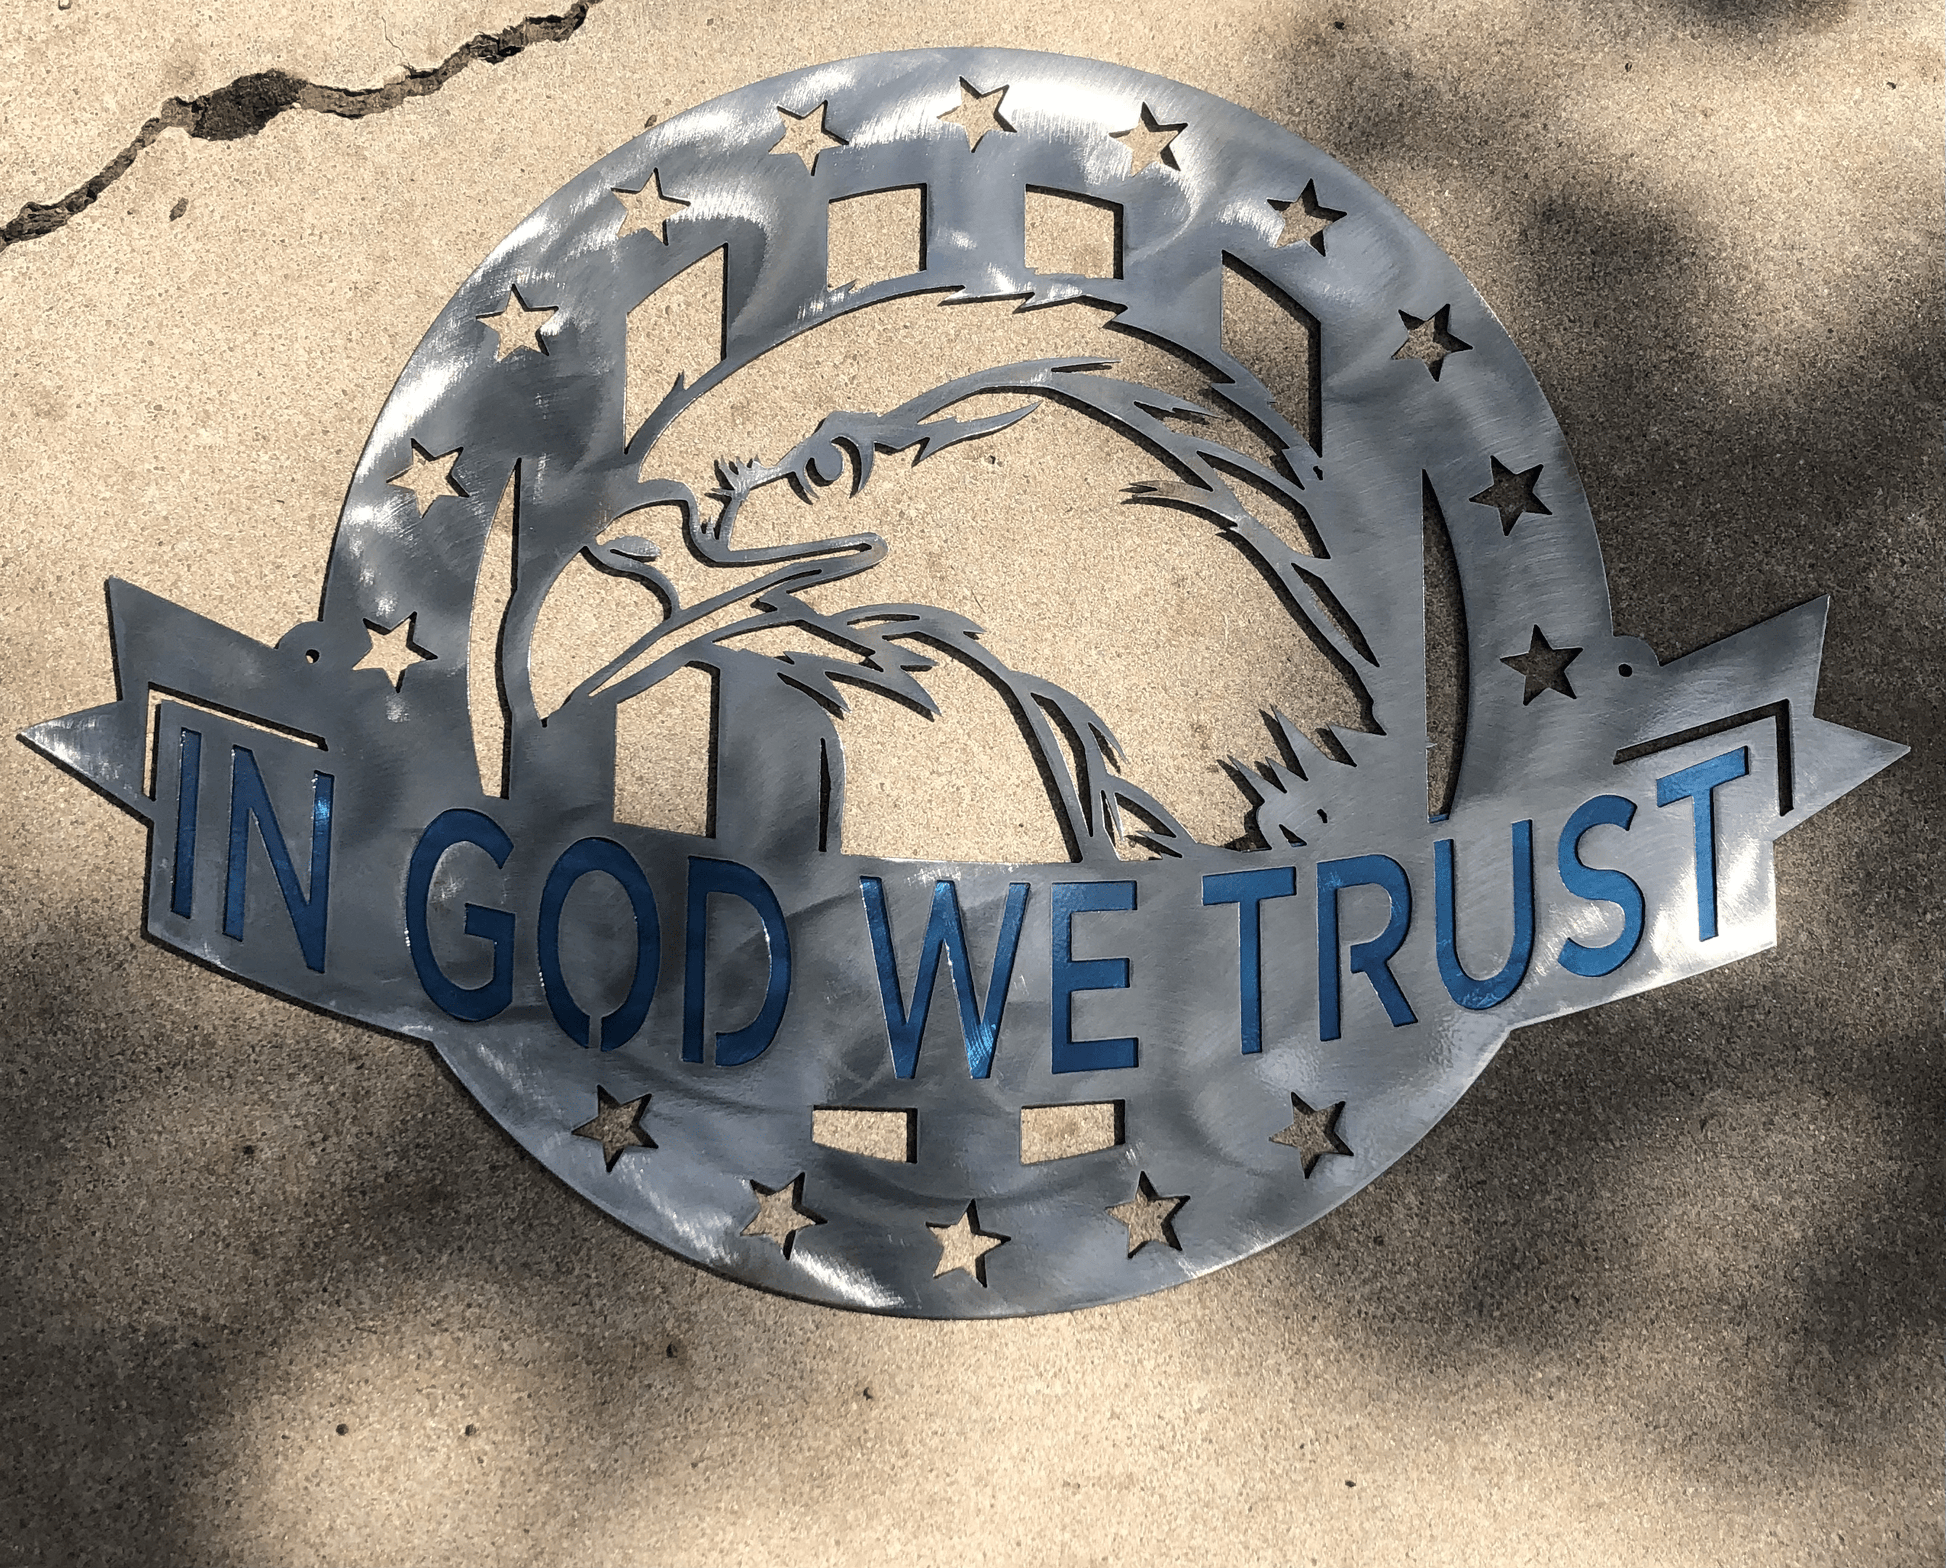 Rusty Rooster Fabrication & Design Physical product Eagle with "In God We Trust" Text (G32)